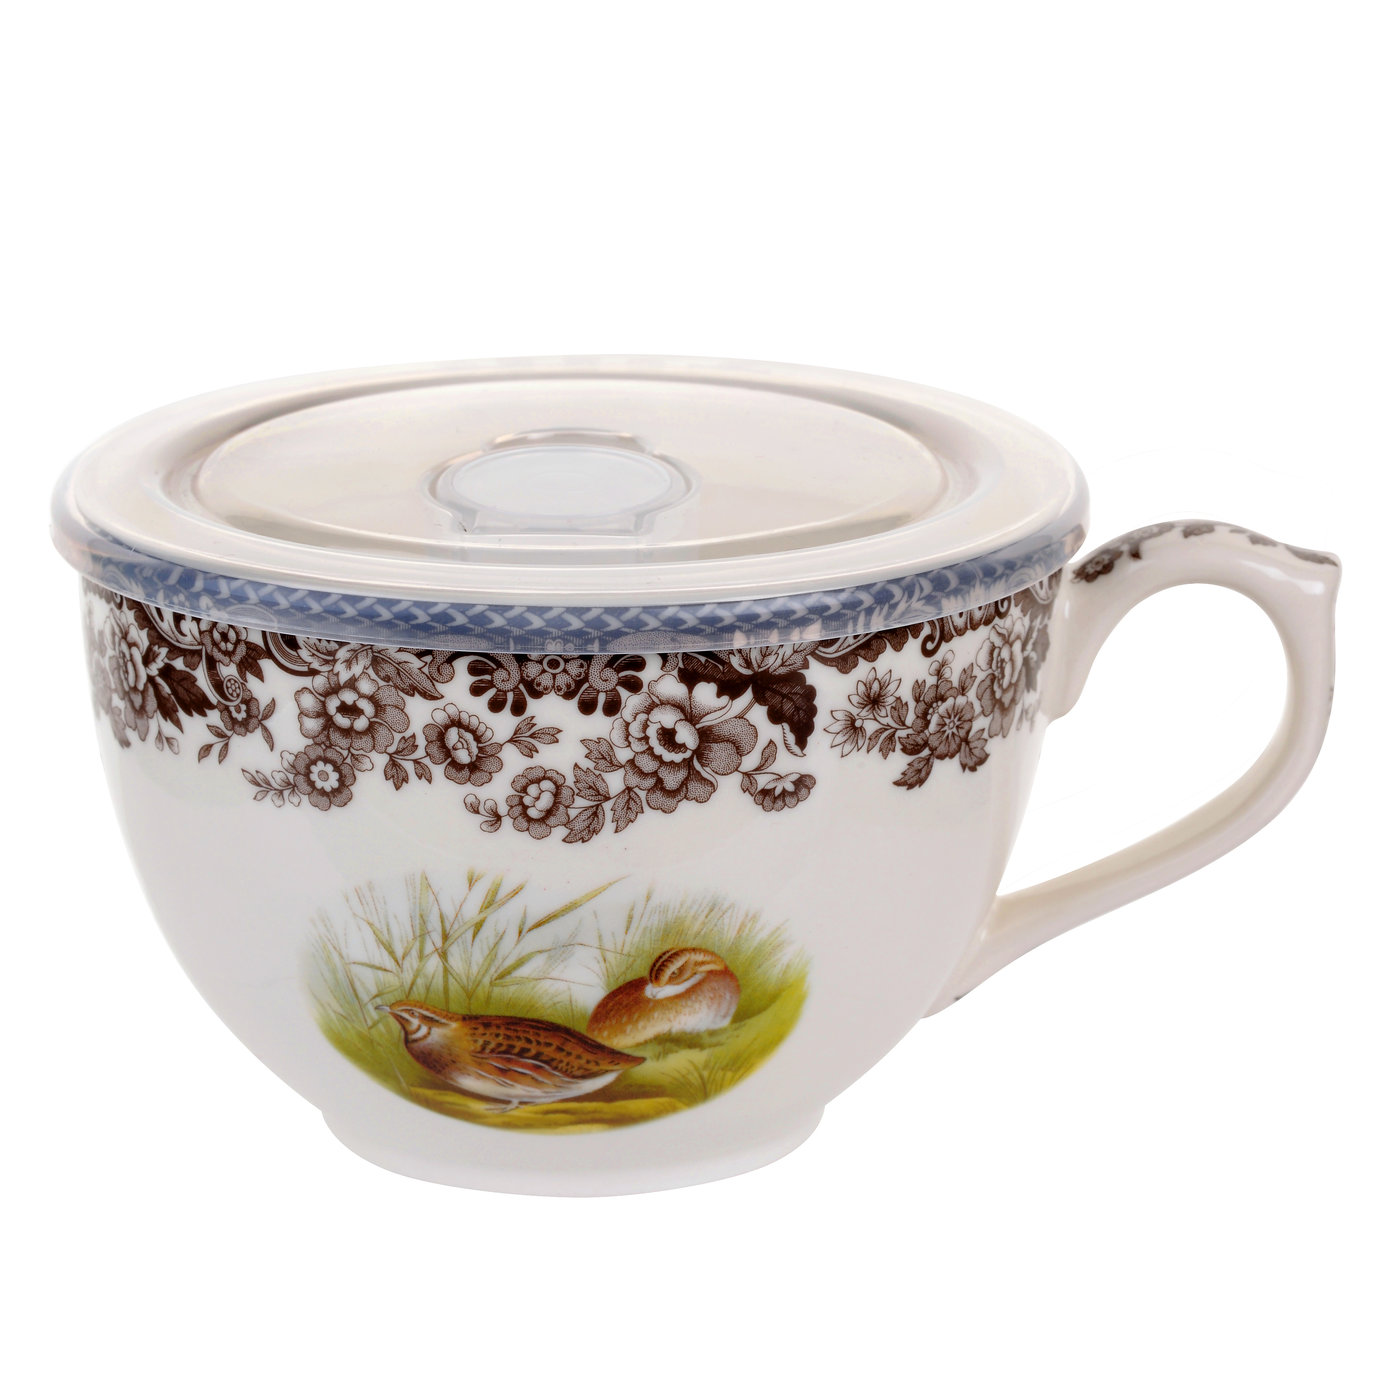 Spode Woodland Jumbo Cup with Lid (Quail) image number null